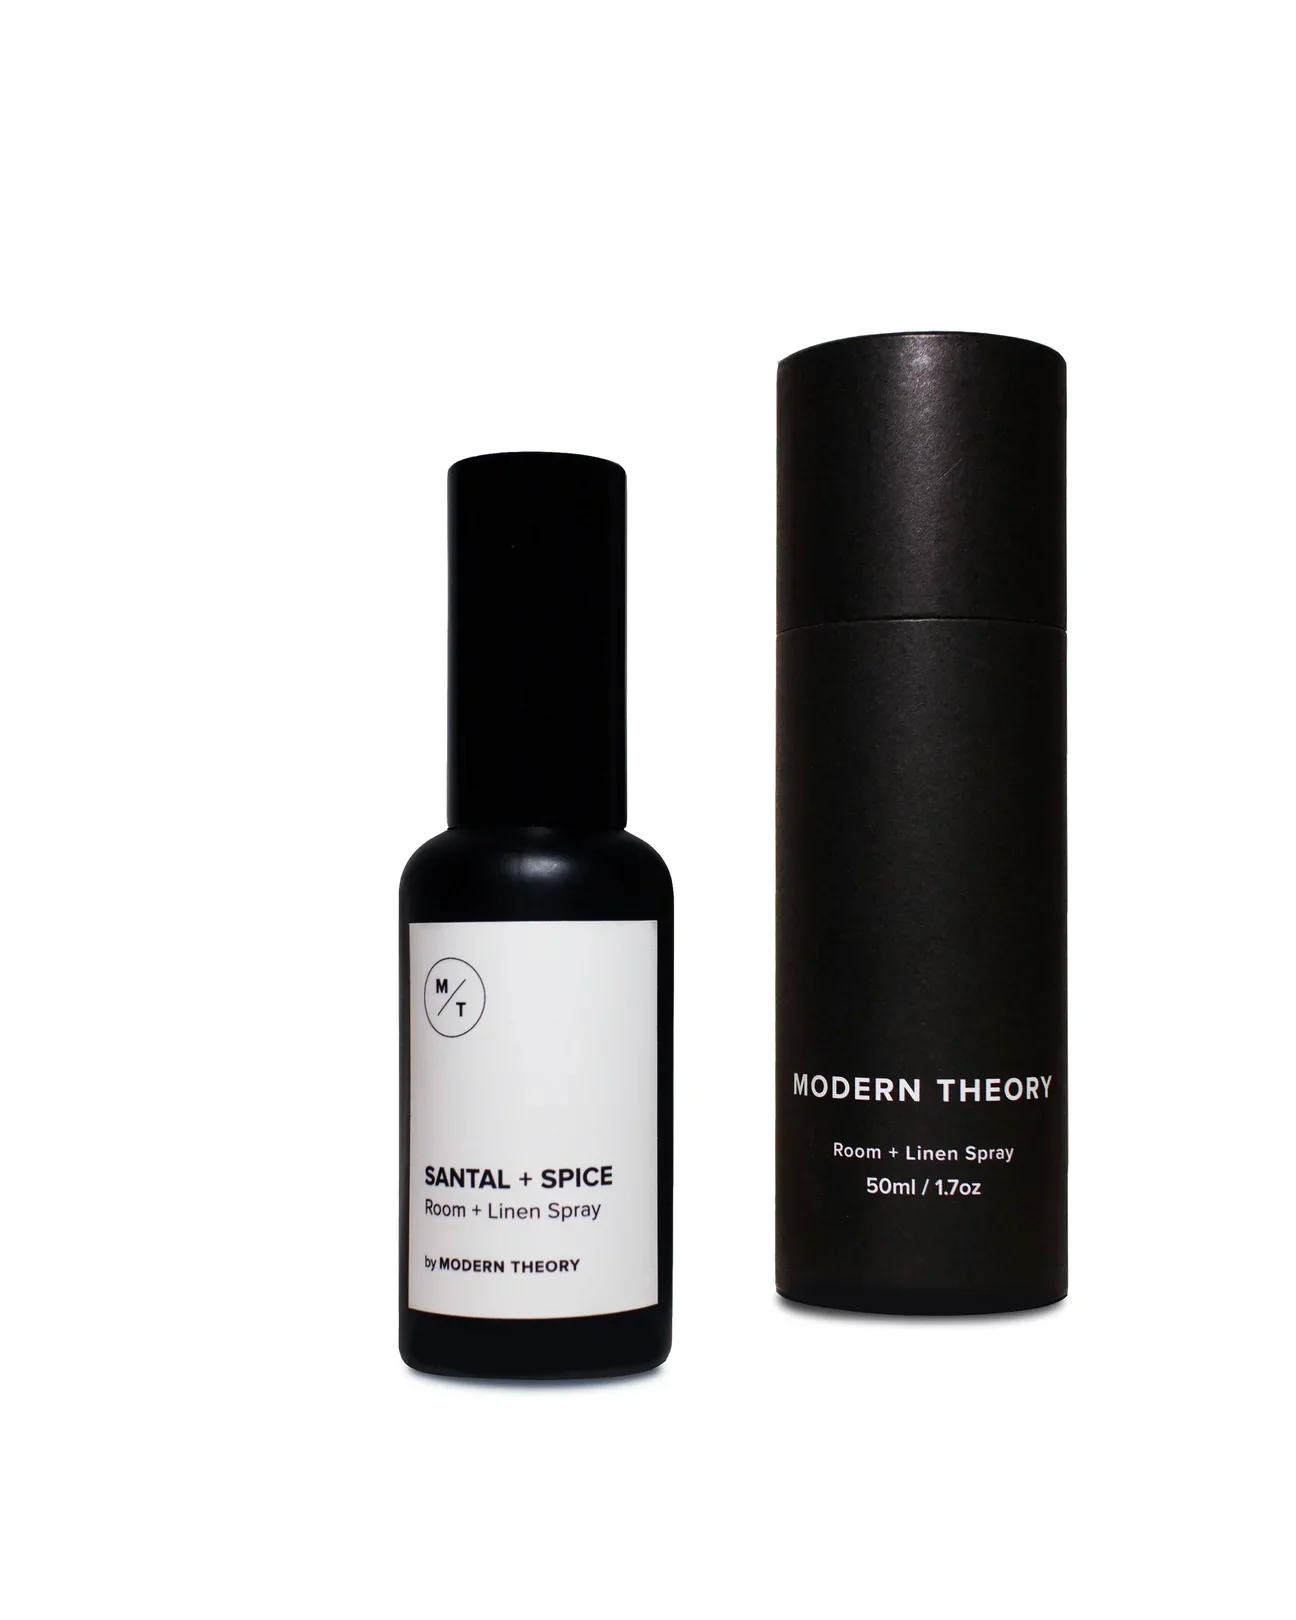 Product Image for SANTAL + SPICE Room & Linen Spray